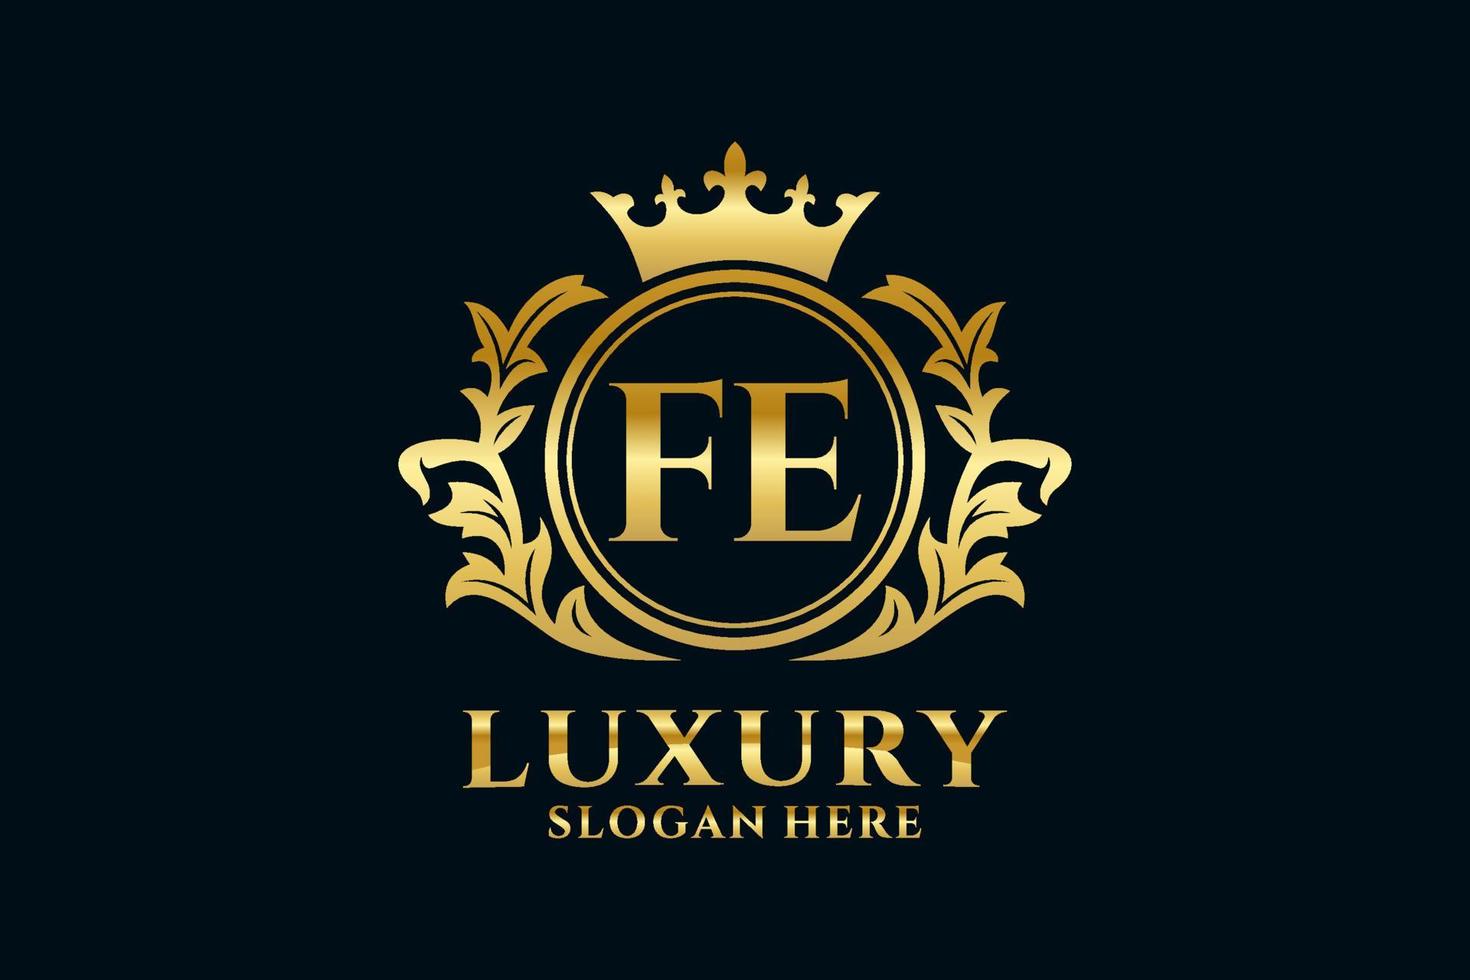 Initial FE Letter Royal Luxury Logo template in vector art for luxurious branding projects and other vector illustration.